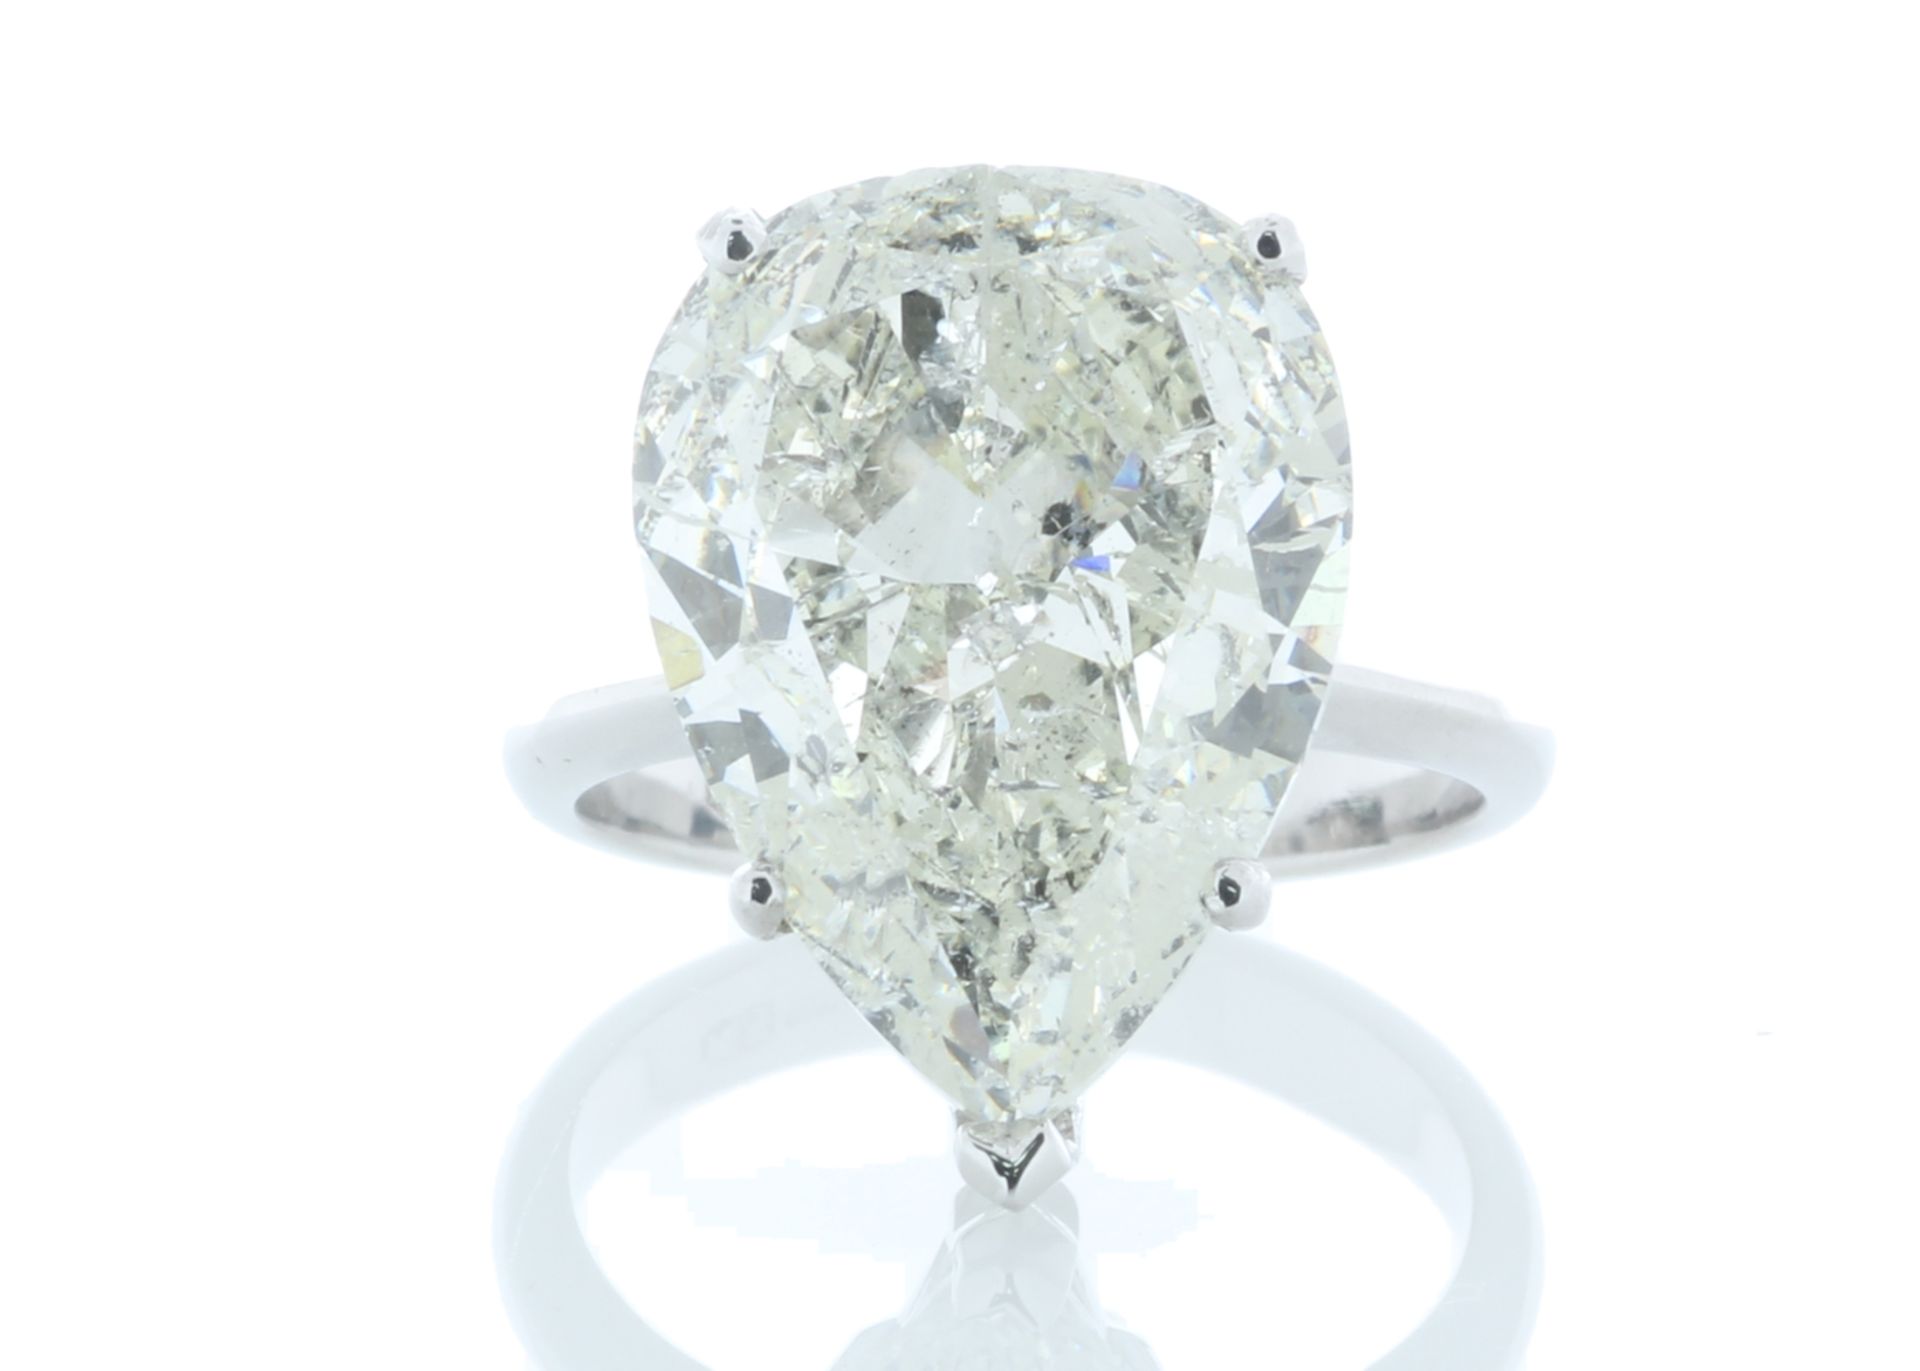 18ct White Gold Pear Shaped Diamond Ring 10.06 Carats - Valued by IDI £175,000.00 - 18ct White